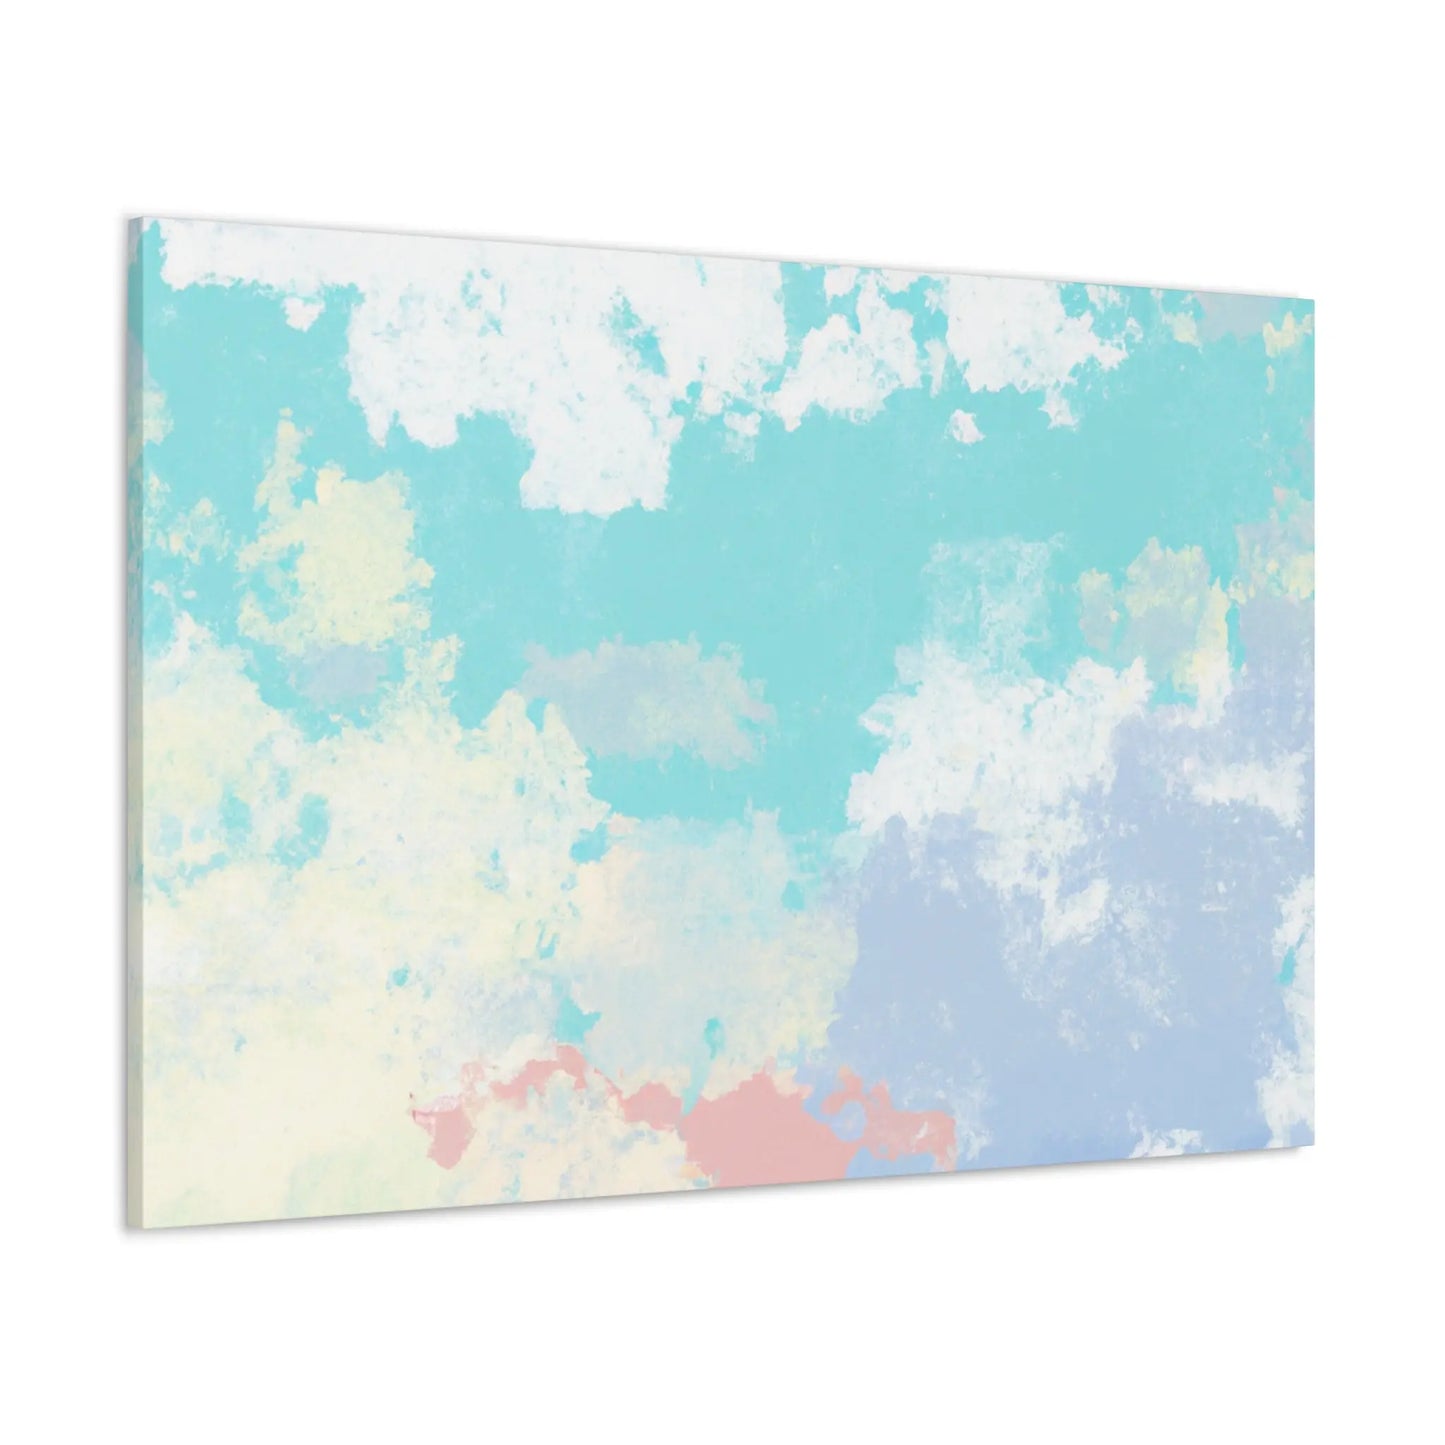 Molte Lumere (Latin for "Many Lights") - Autism Canvas Art